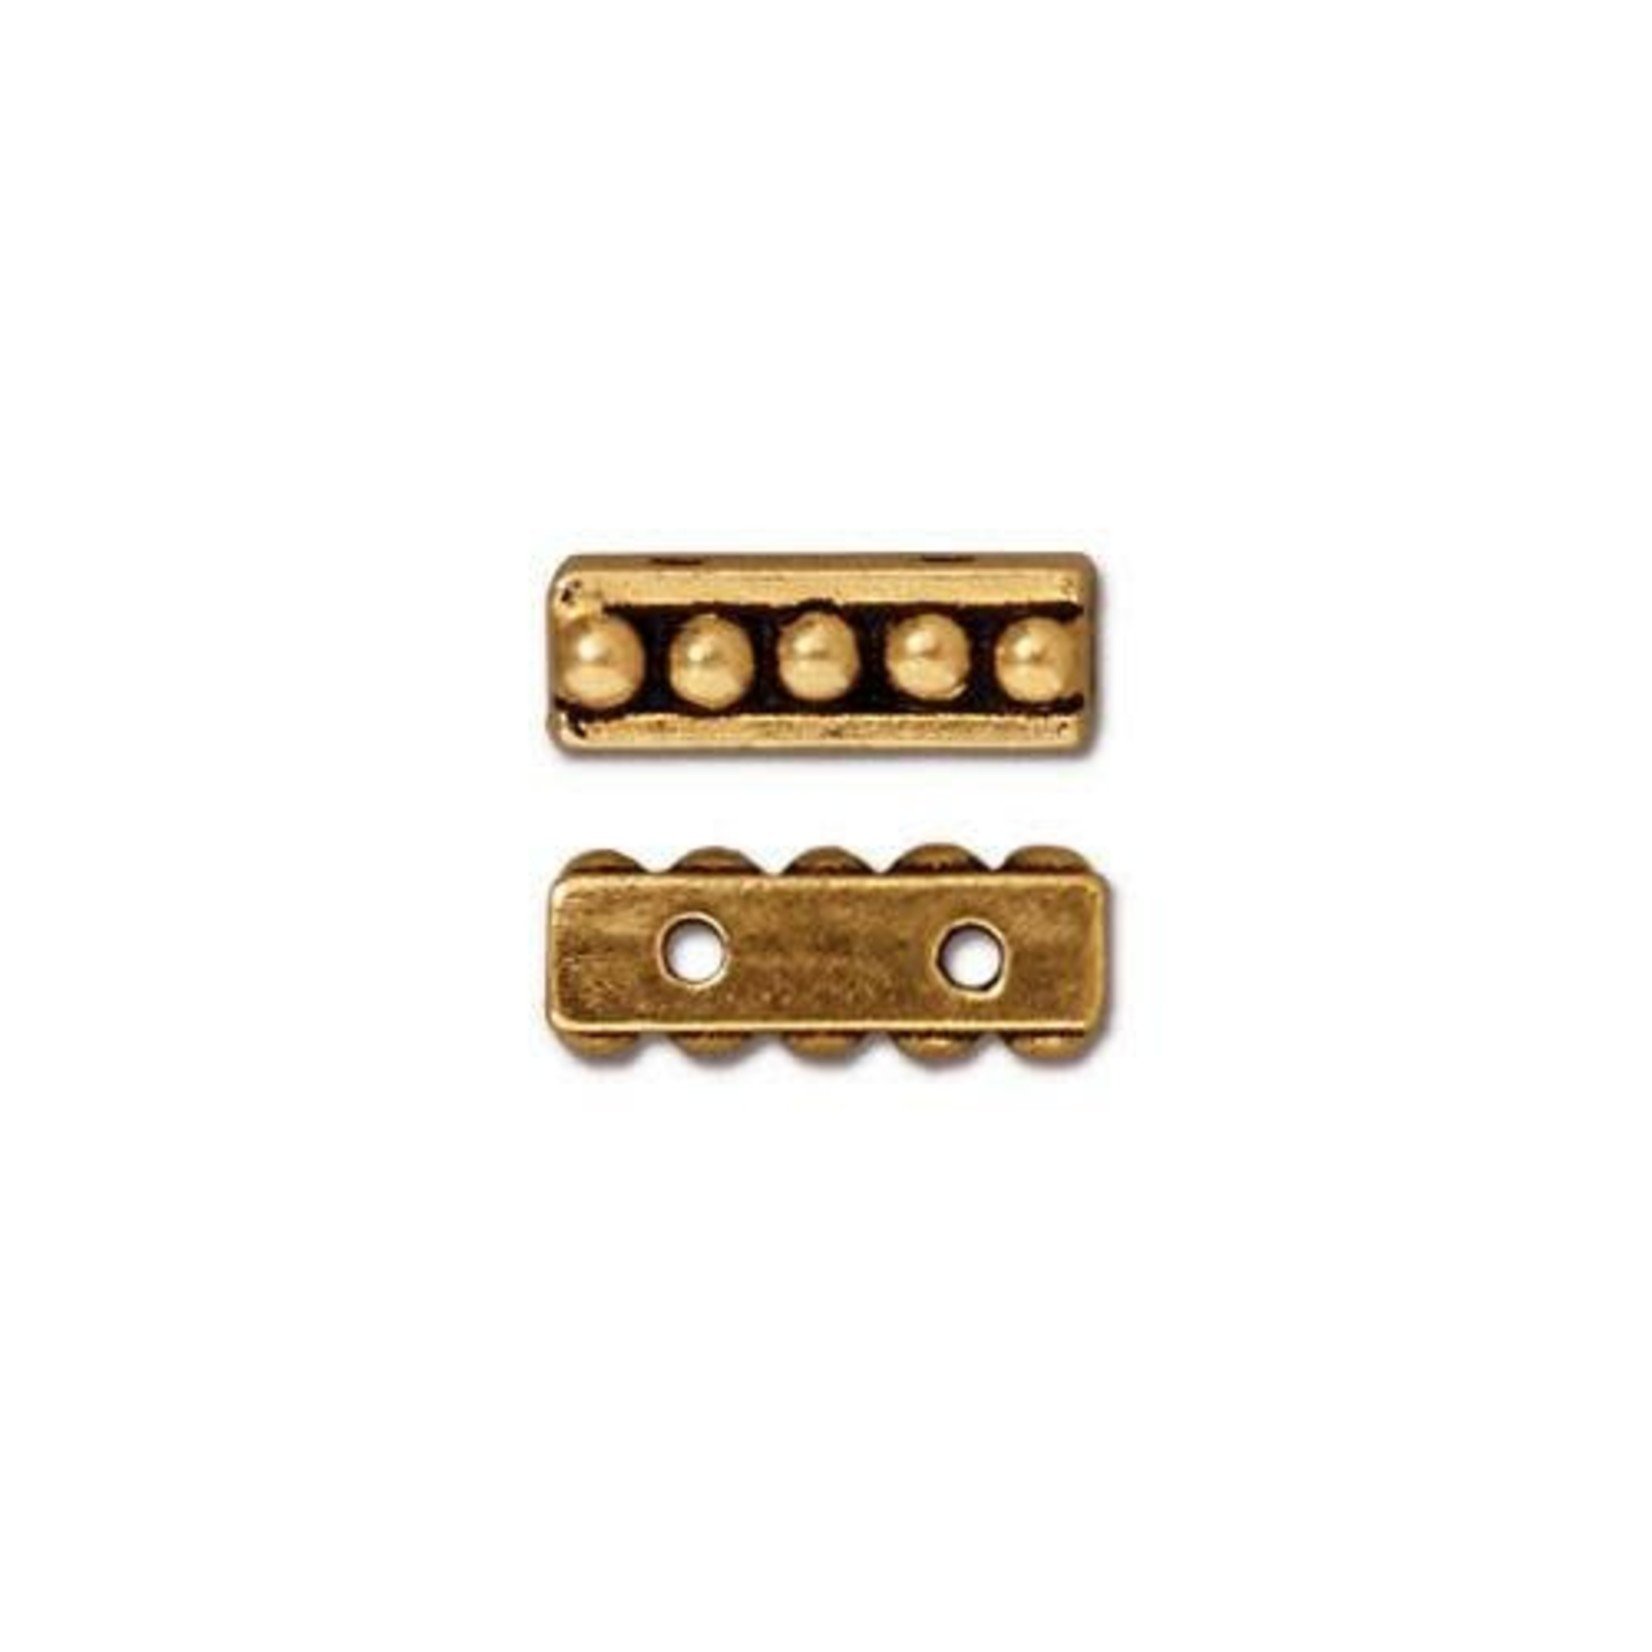 TierraCast Tierracast Antique Gold Plated Beaded 2-hole Link Spacer